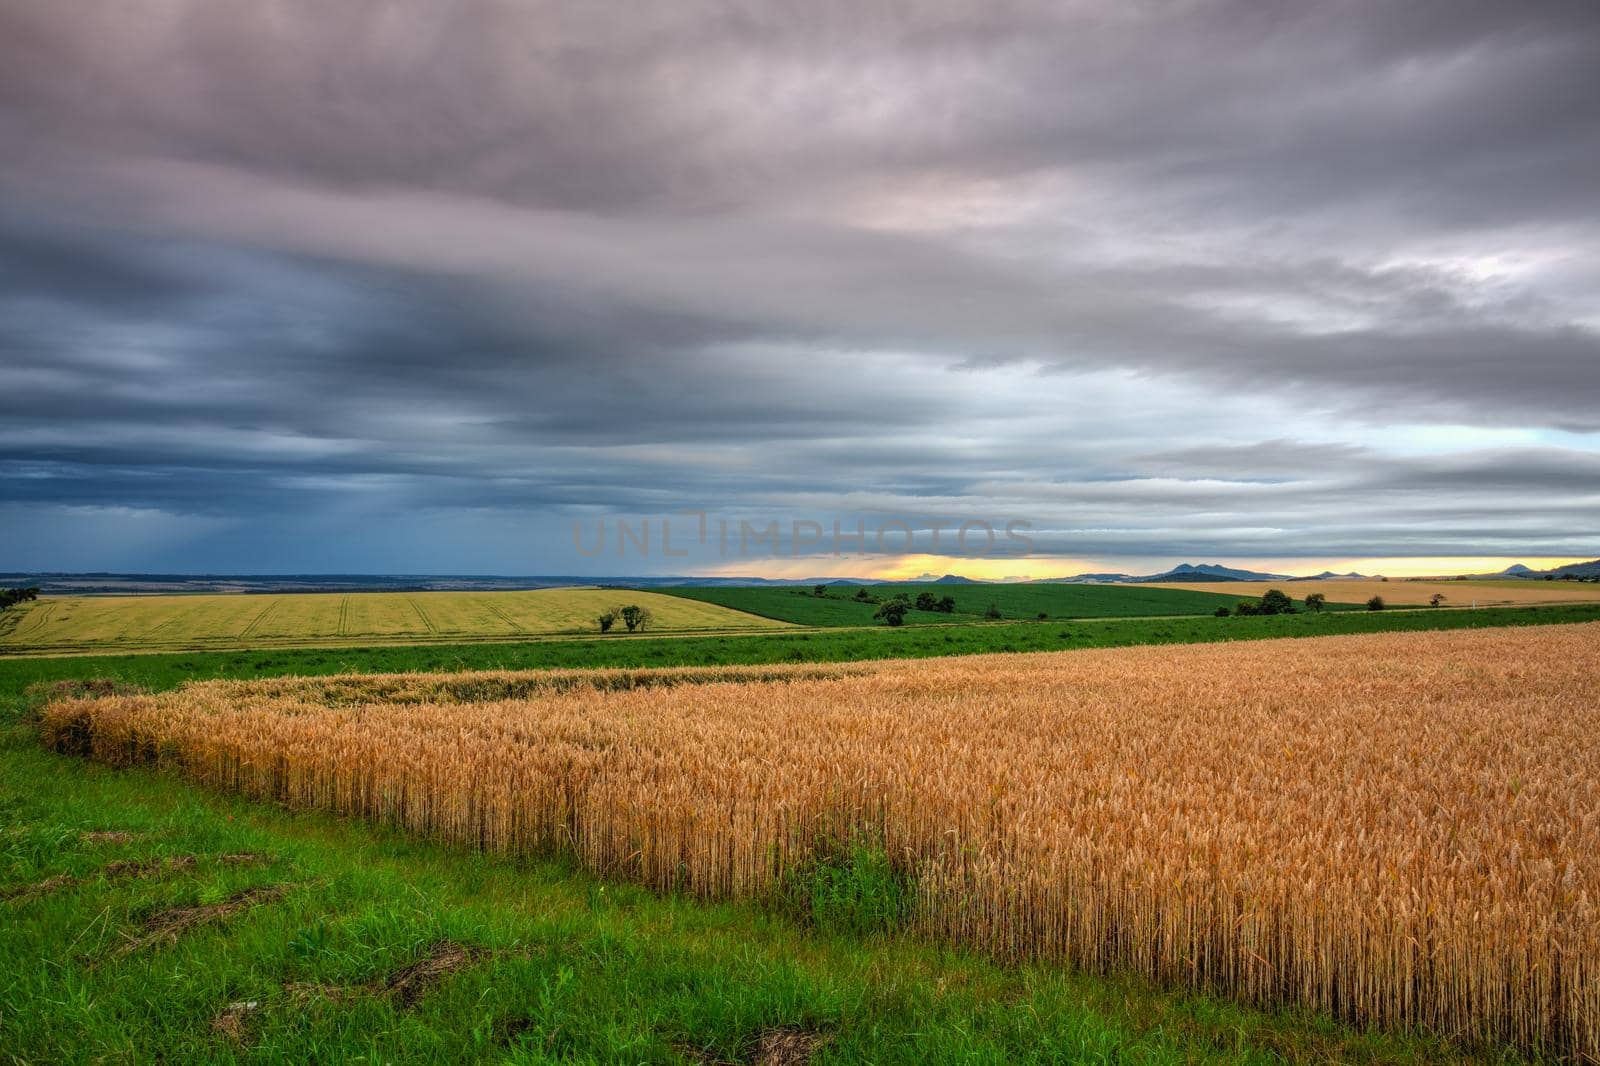 Barley field and amazing sunset before heavy storm  by CaptureLight